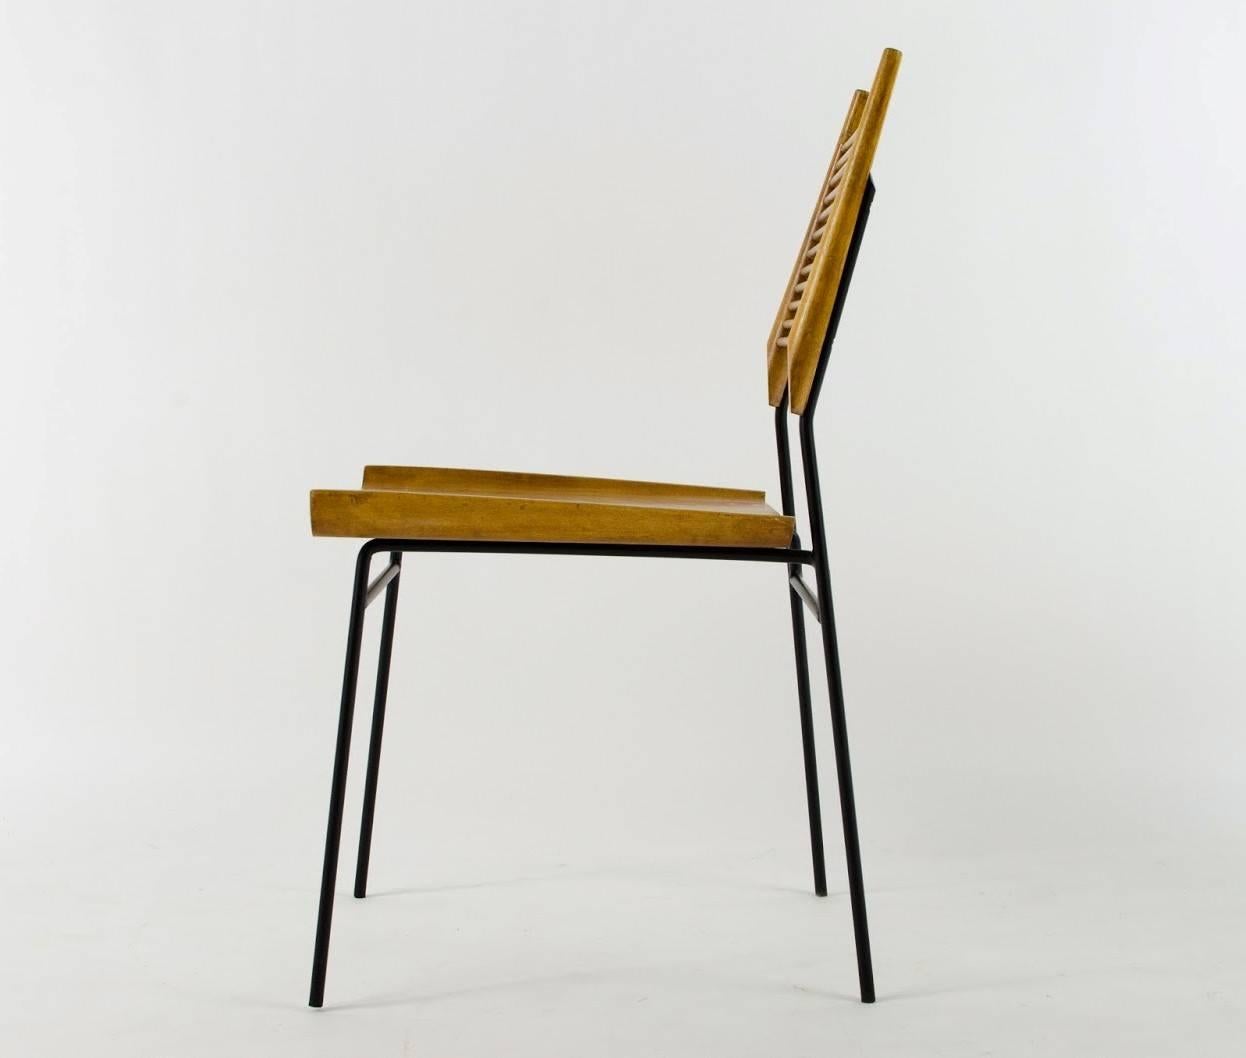 Famous chair designed by Paul McCobb. Blonde birchwood on a Minimalist wrought iron frame. Known as the 'Shovel Chair' for the sculpted shovel like seat. Thin dowel slat backrest.